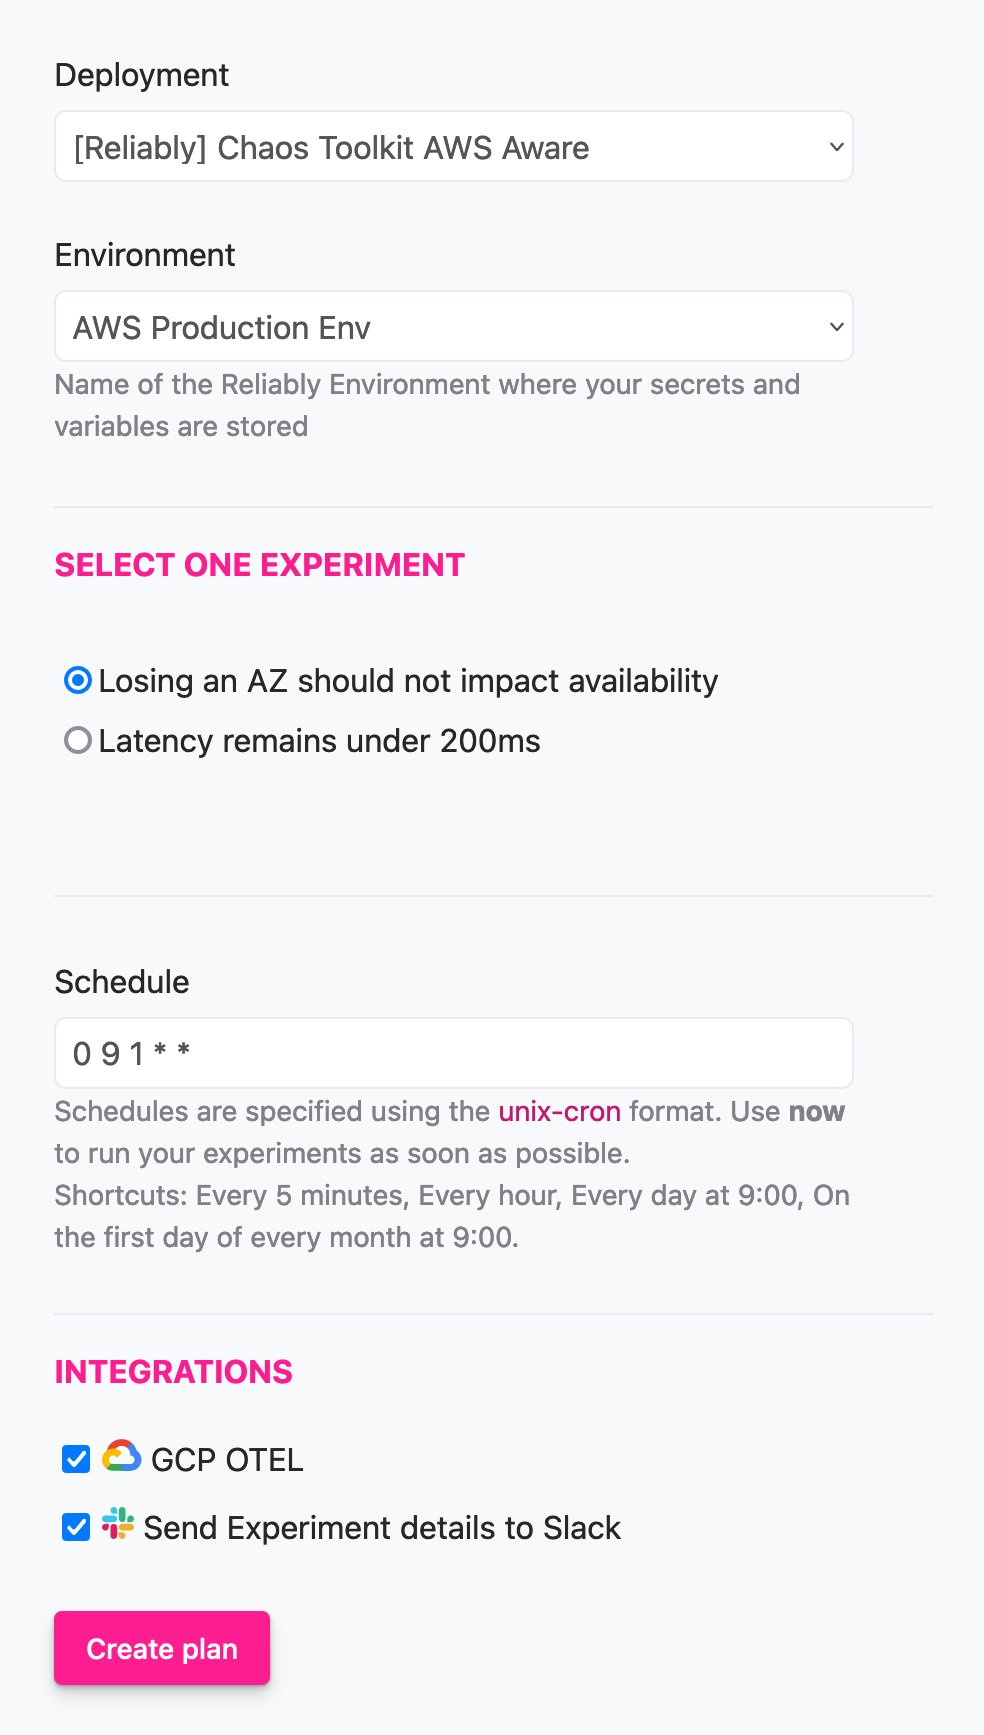 A screenshot of the Plan creation form in the Reliably App. The form displays a select field to choose a deployment, a list of checkboxes to pick experiments and a text field to type a schedule in the form of a CRON schedule.